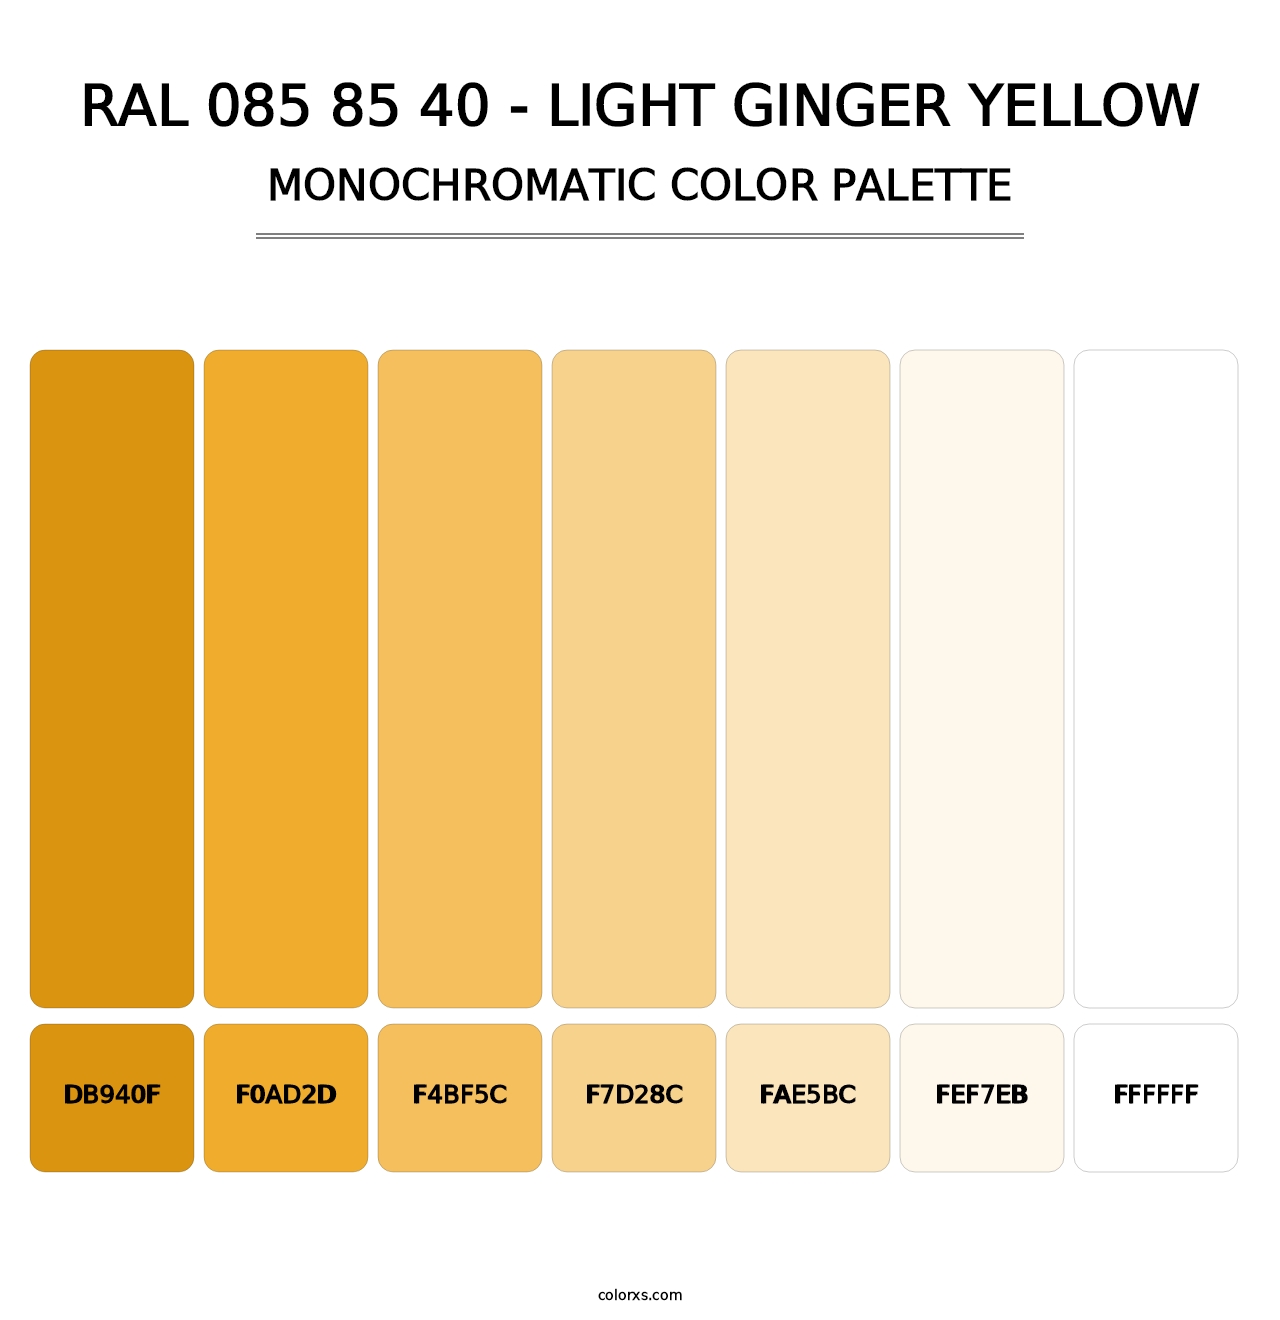 RAL 085 85 40 - Light Ginger Yellow - Monochromatic Color Palette